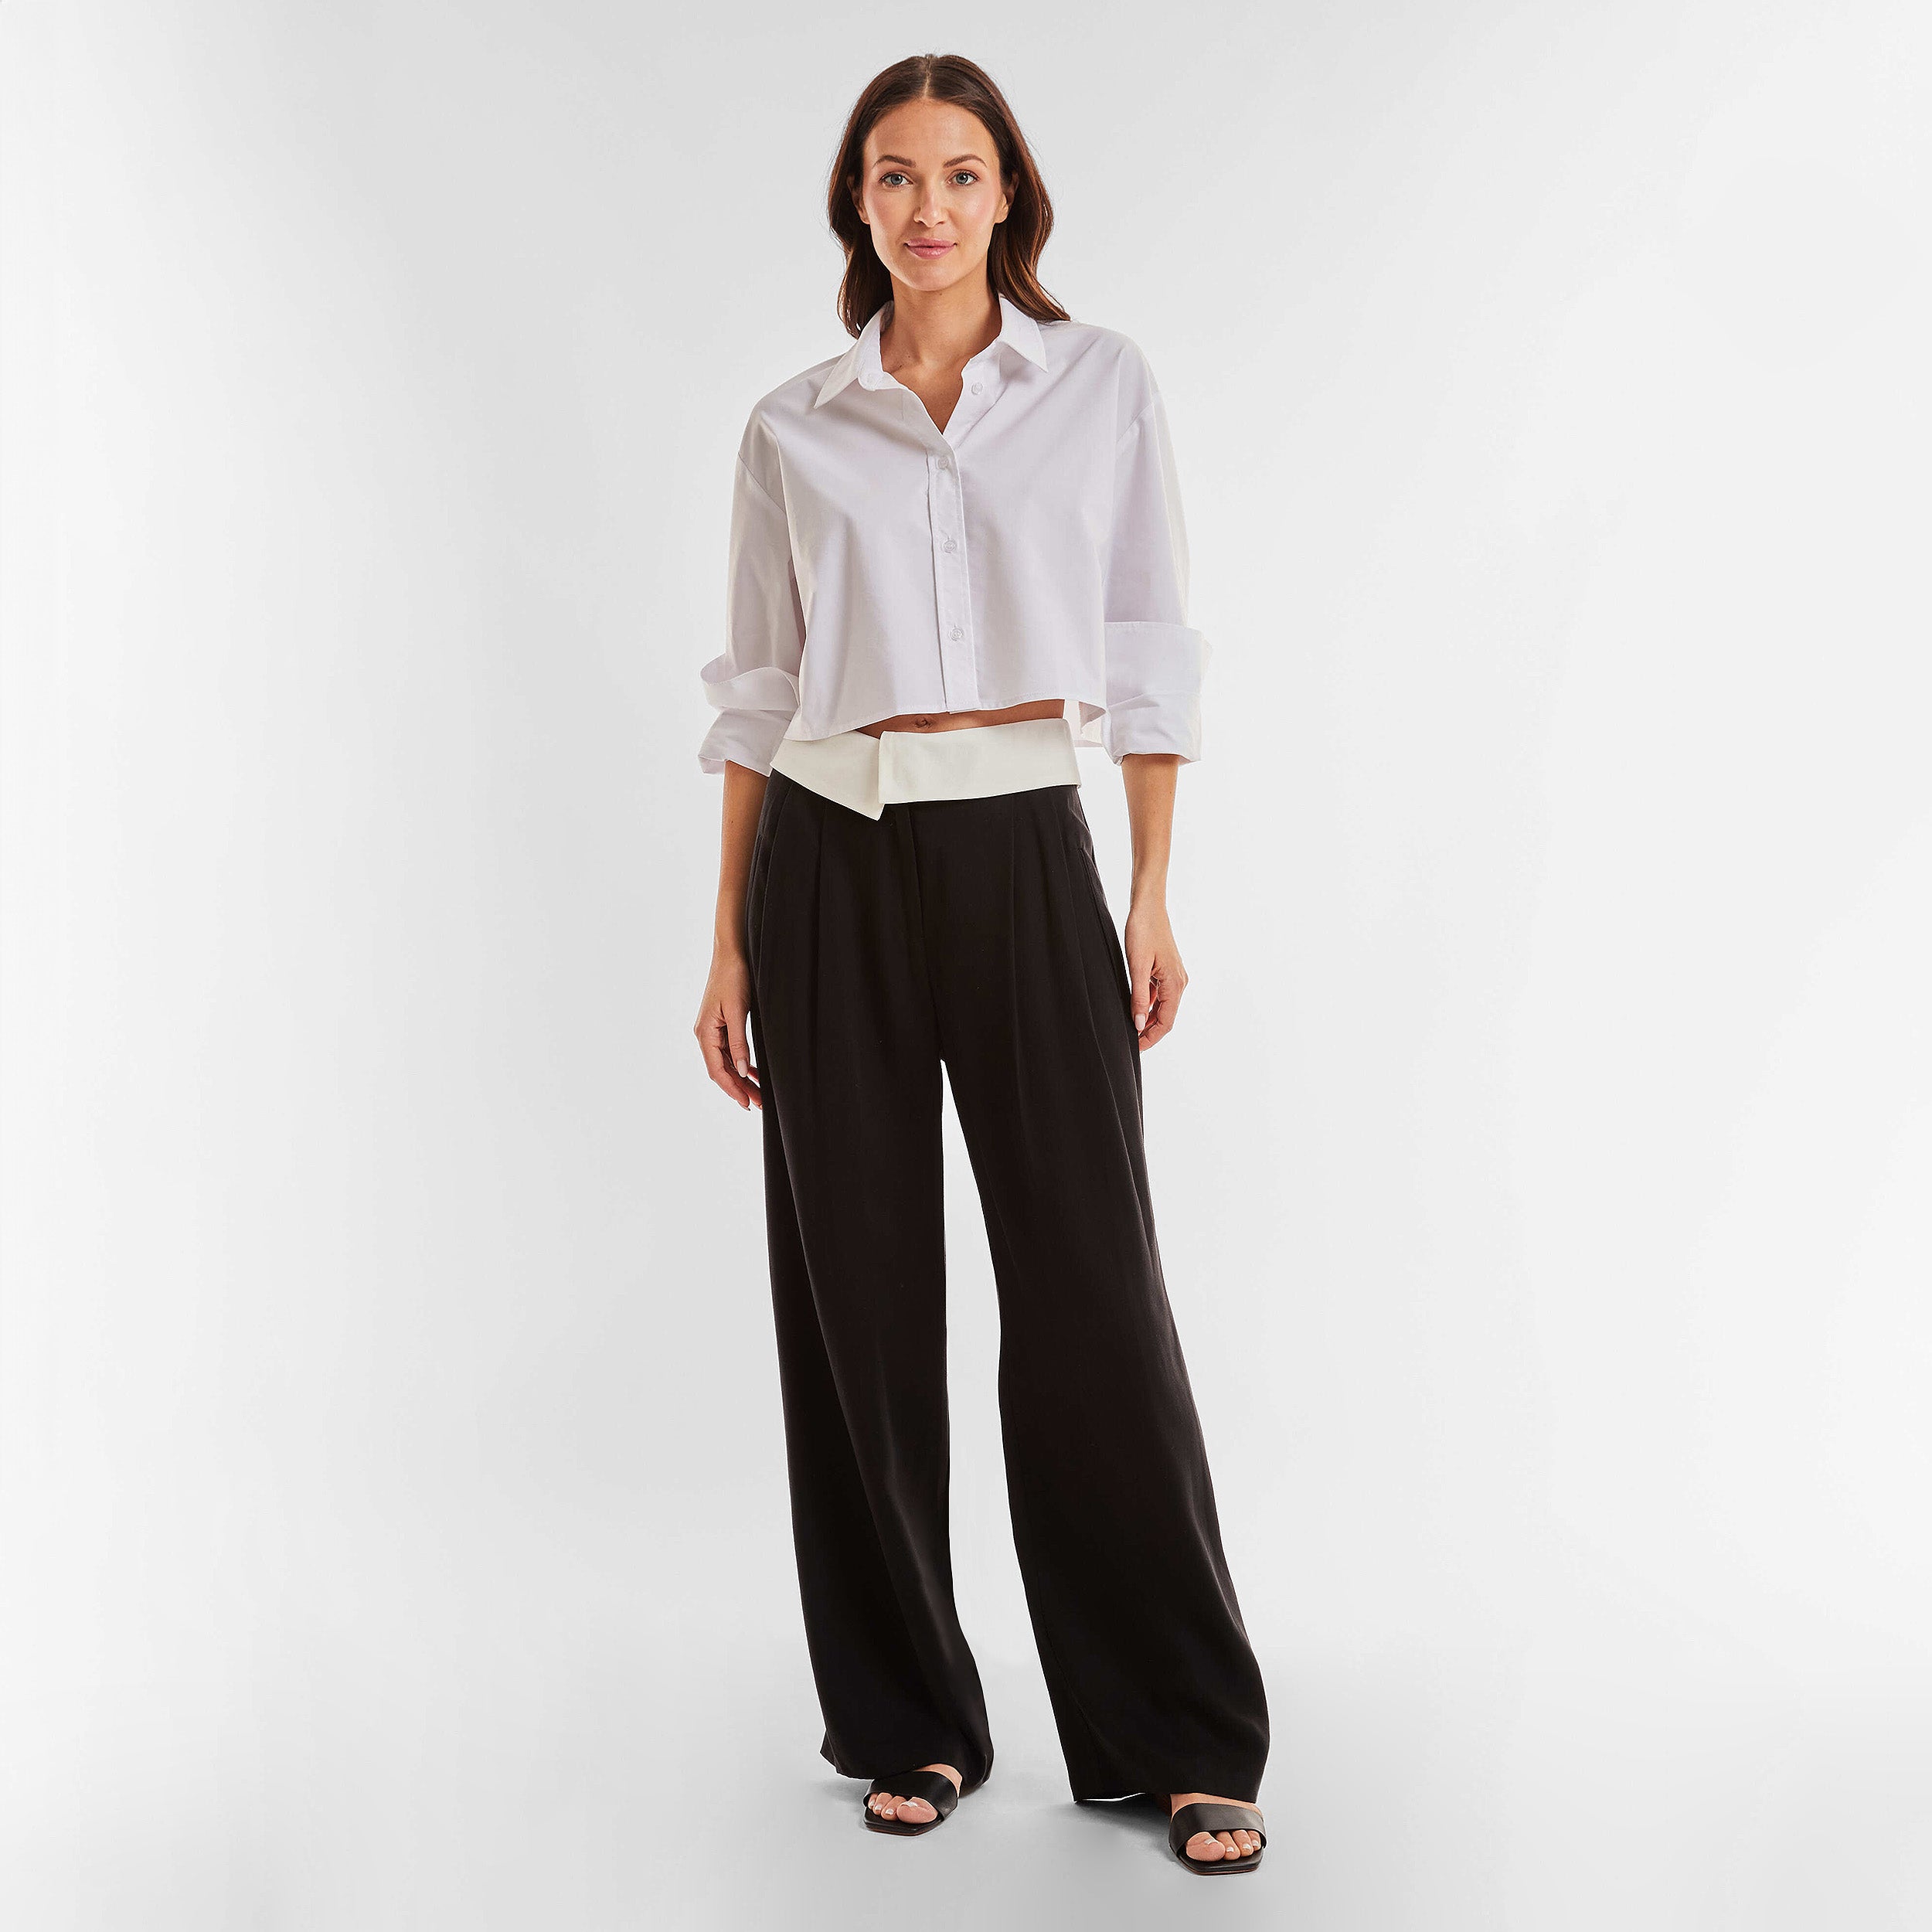 Full view of woman wearing black trousers with white foldover waistband detail.